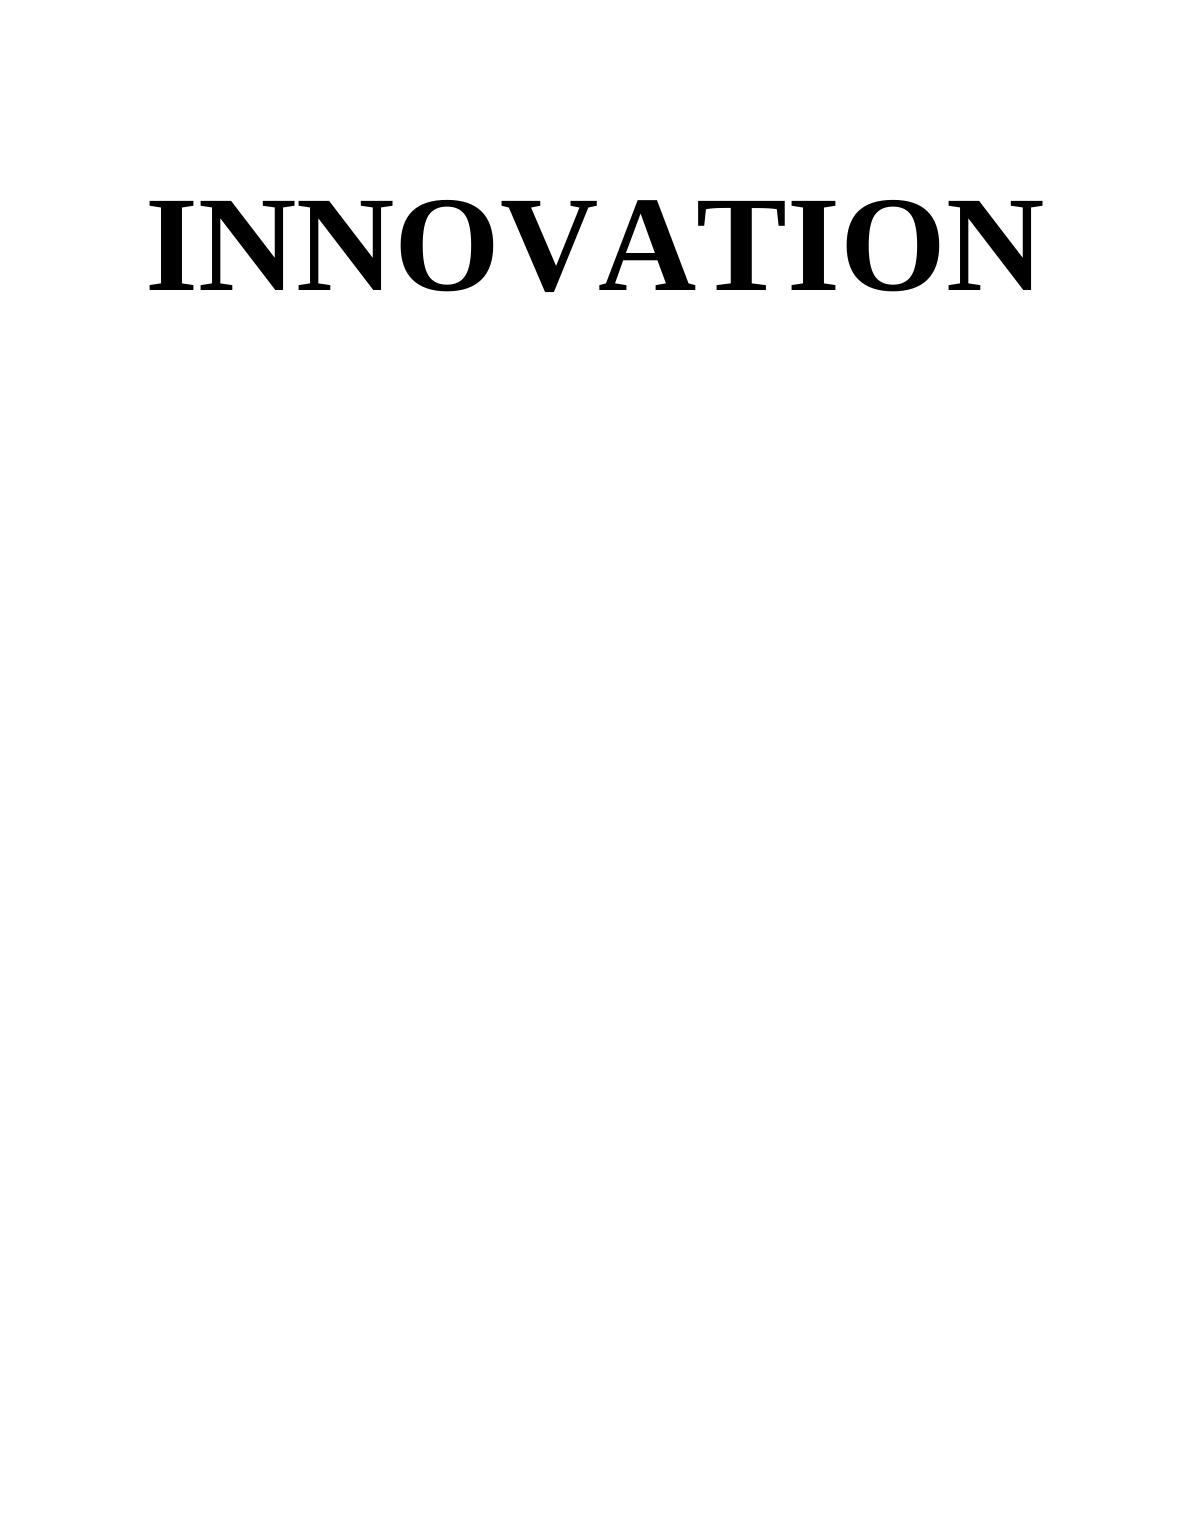 (solved) Innovation : Assignment_1